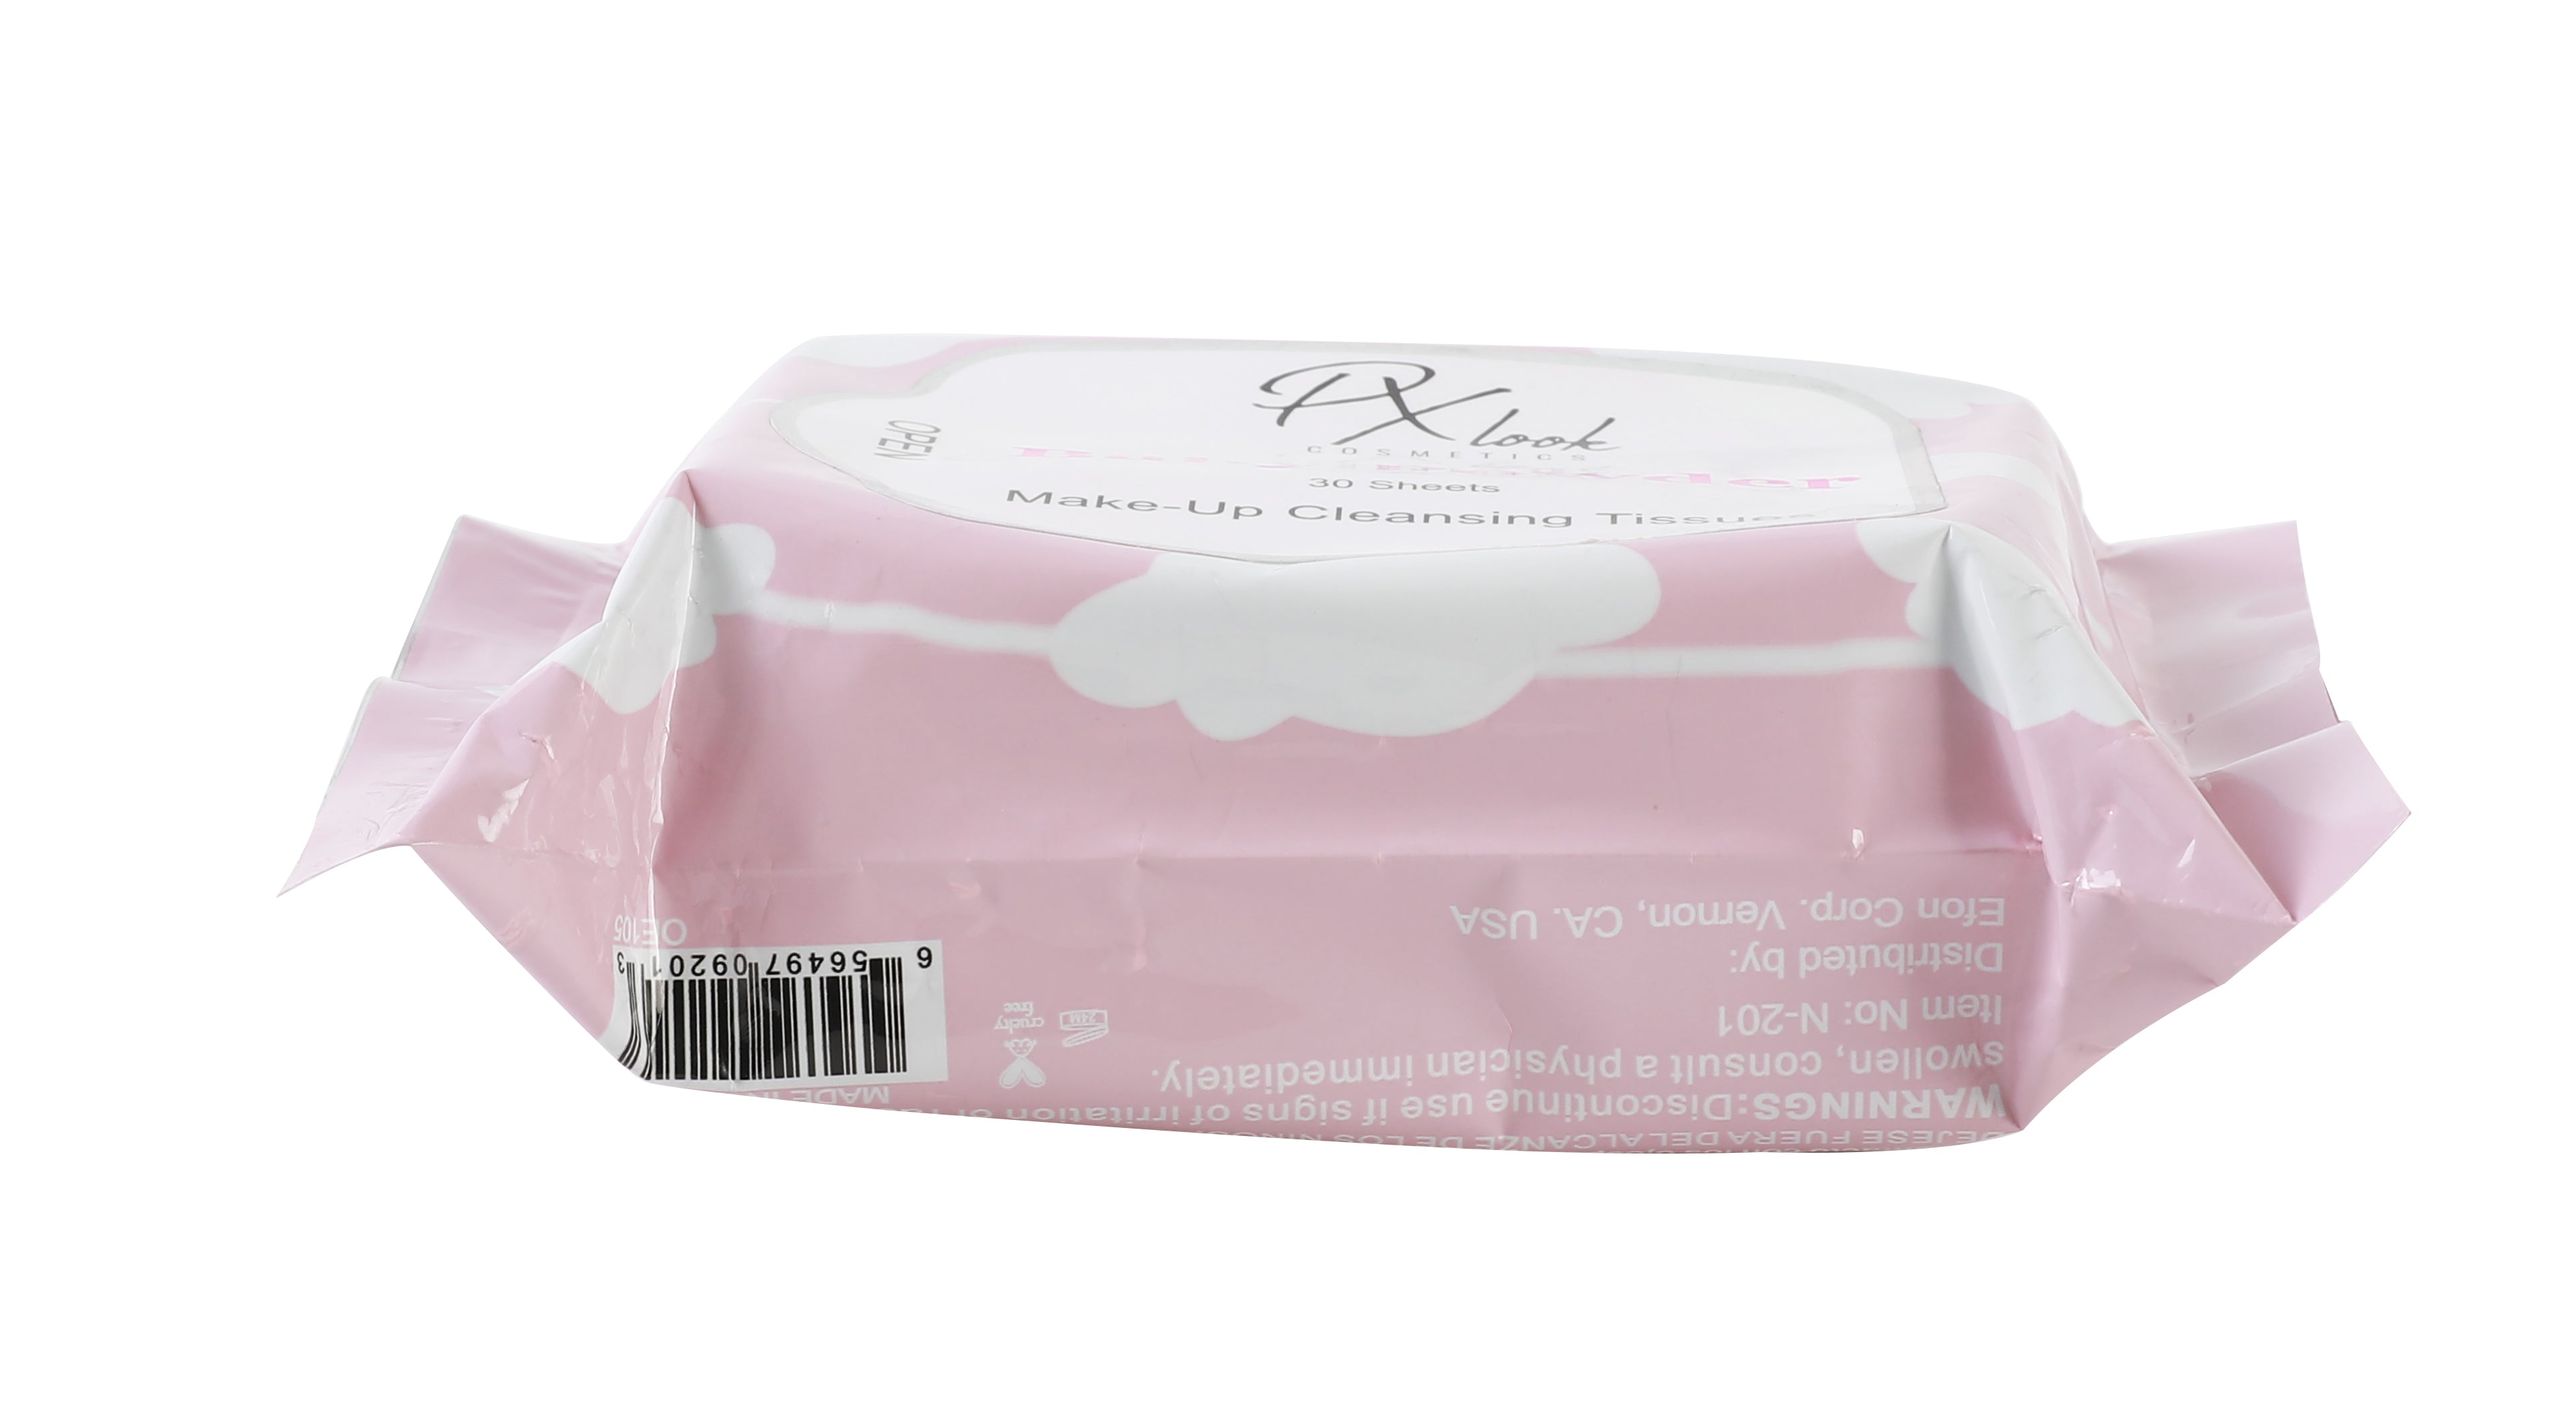 PXLOOK MAKEUP CLEANSING TISSUES